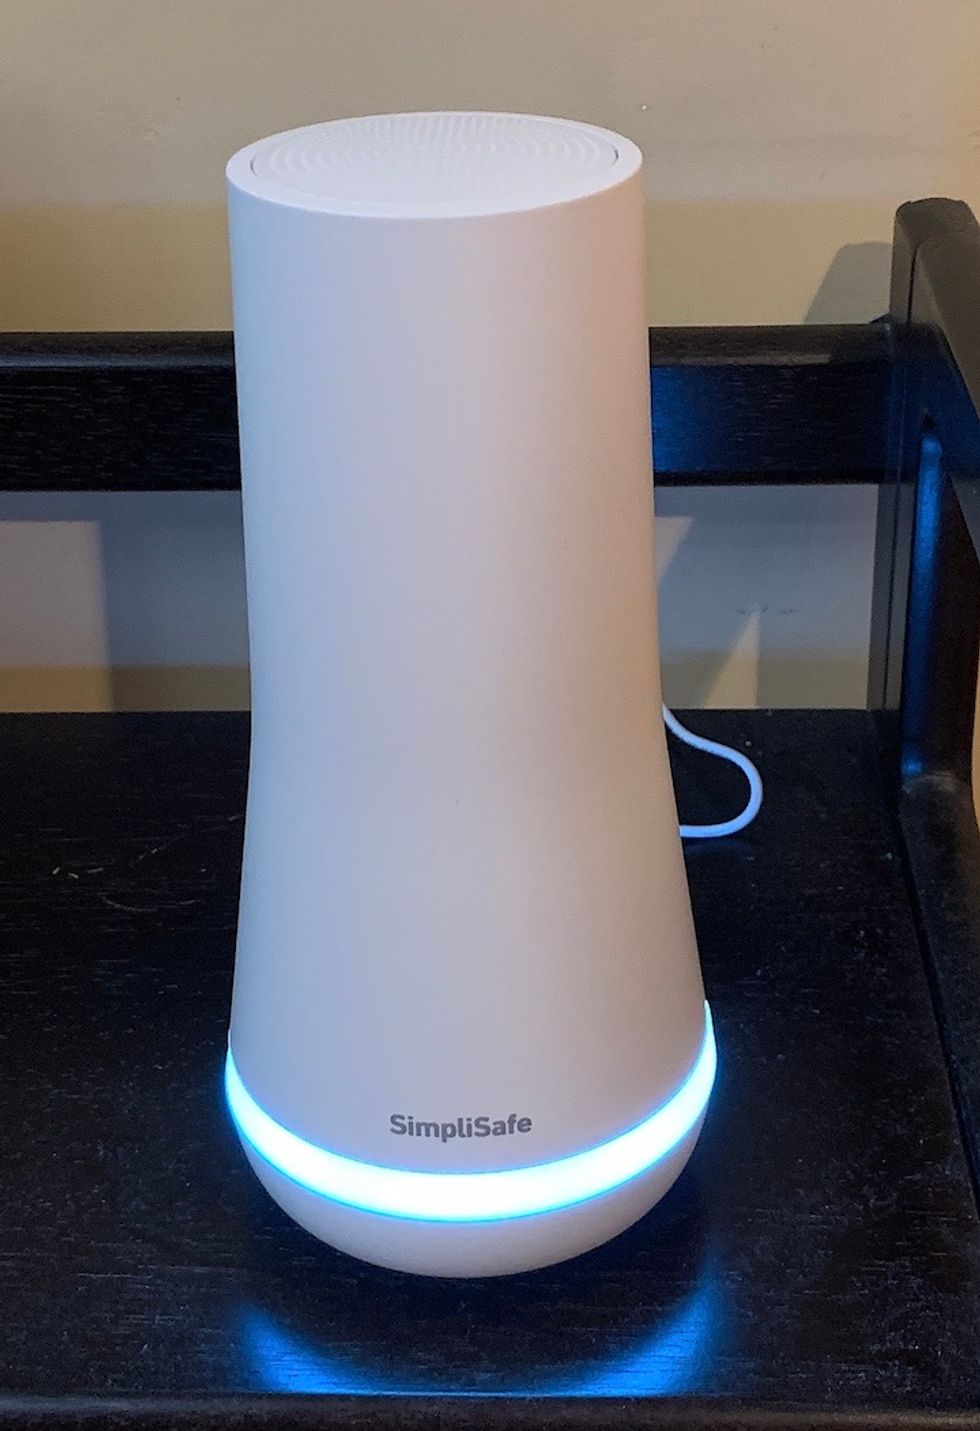 A tall white plastic device, with a blue light ring at the base and the word "SimpliSafe" written across the bottom